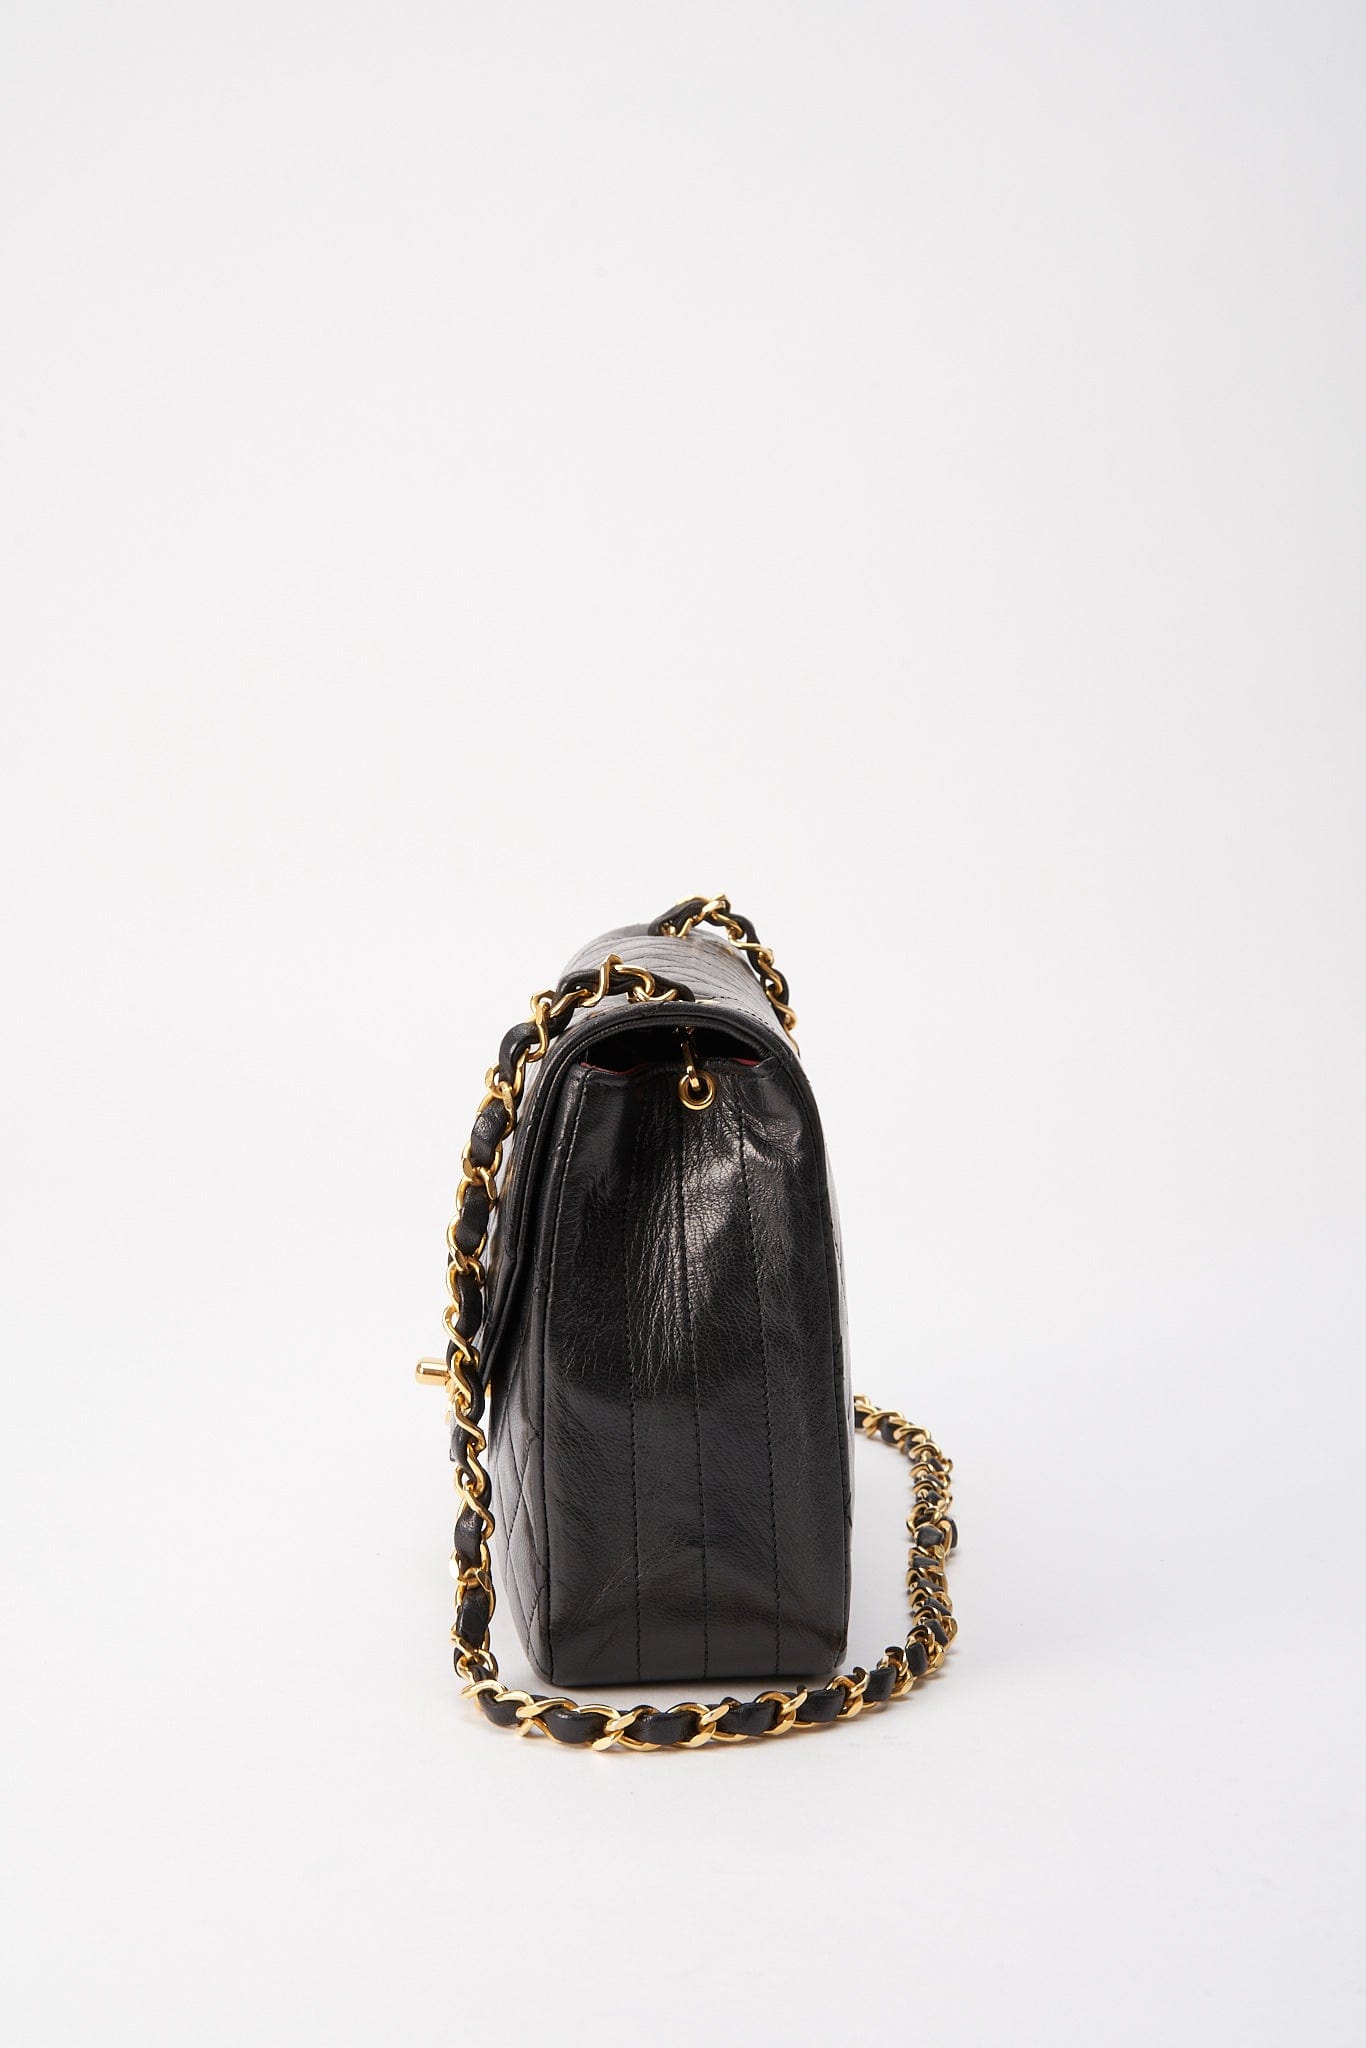 Chanel Vintage Black Single Flap with 24k gold plated hardware – The Hosta